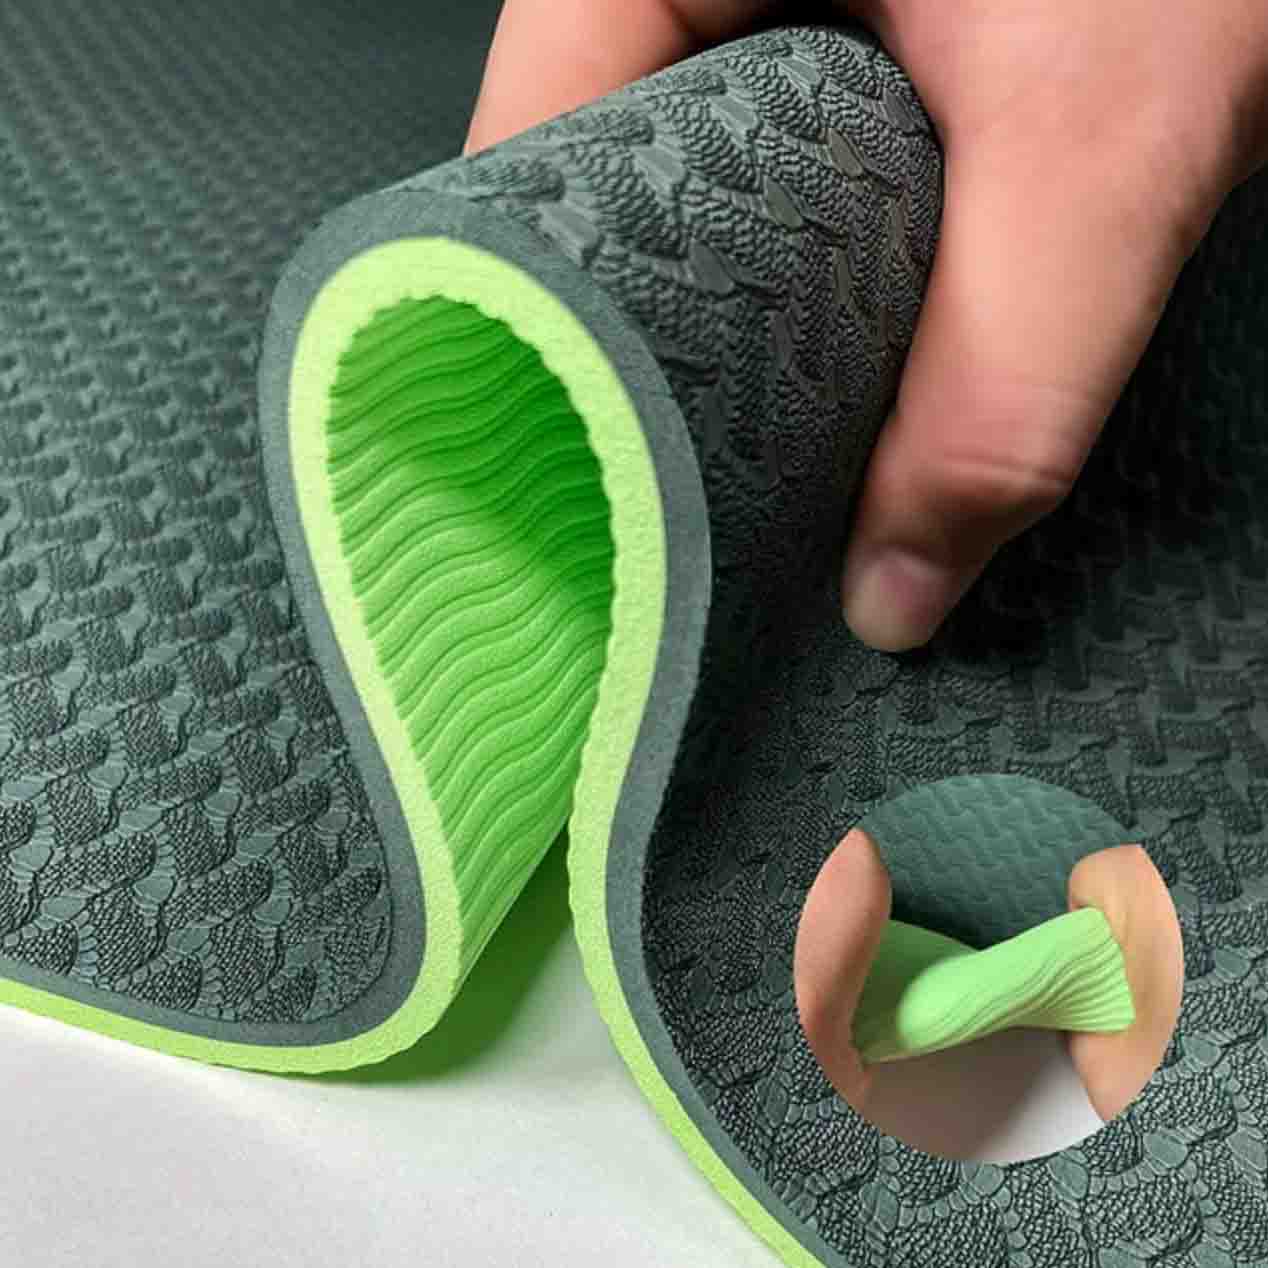 Person squeezing thick green yoga mat